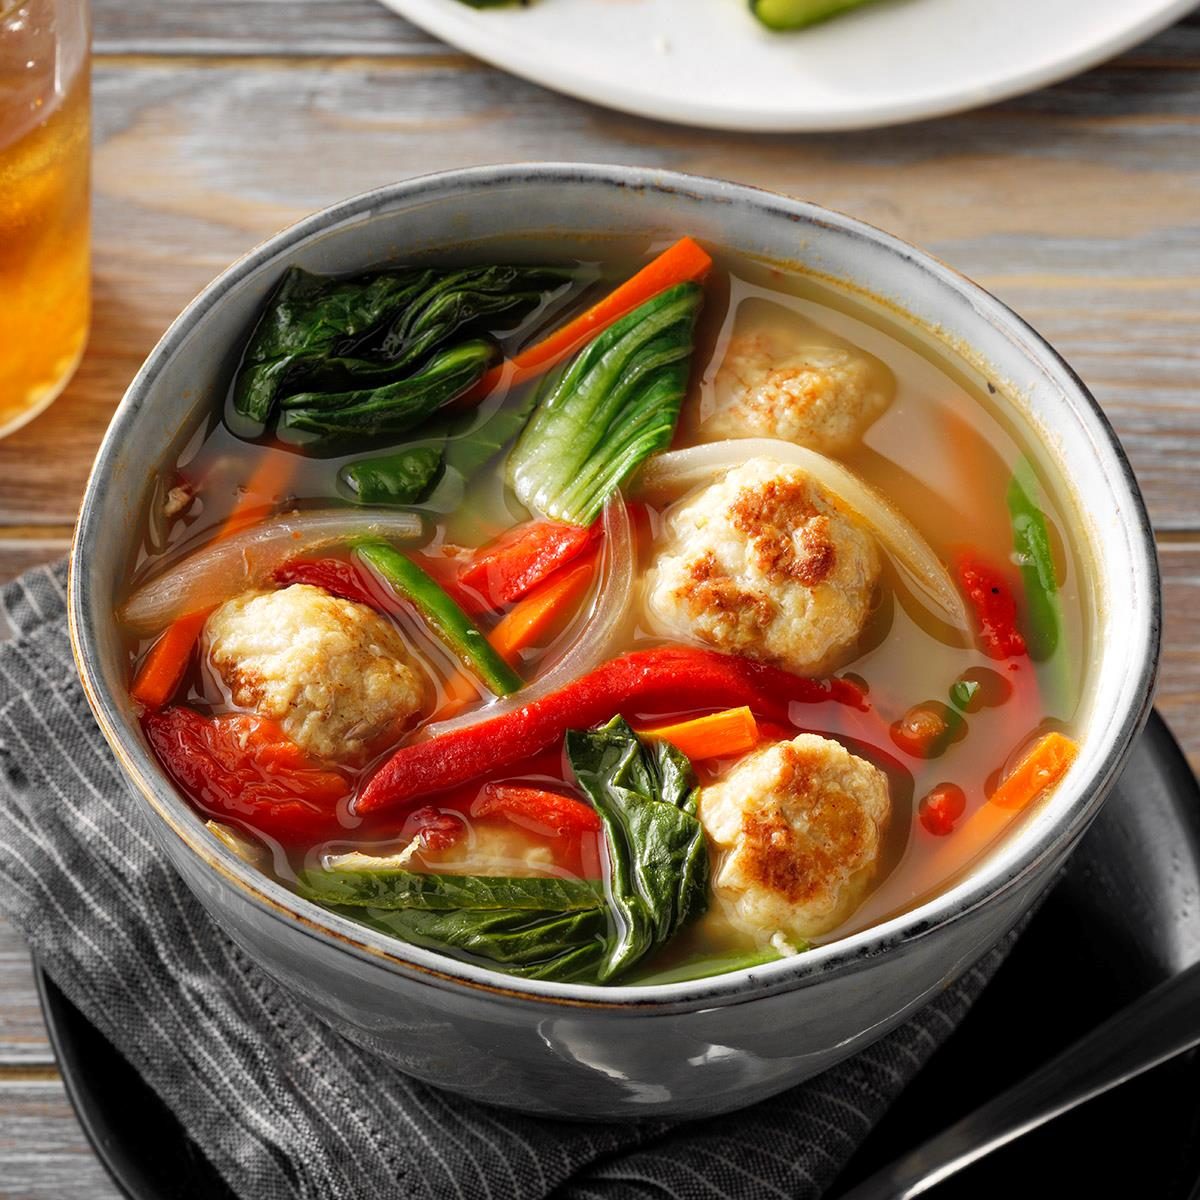 https://www.tasteofhome.com/wp-content/uploads/2019/09/Vietnamese-Chicken-Meatball-Soup-with-Bok-Choy_EXPS_TOHFM20_198499_E07_10_4b-12.jpg?fit=700%2C1024